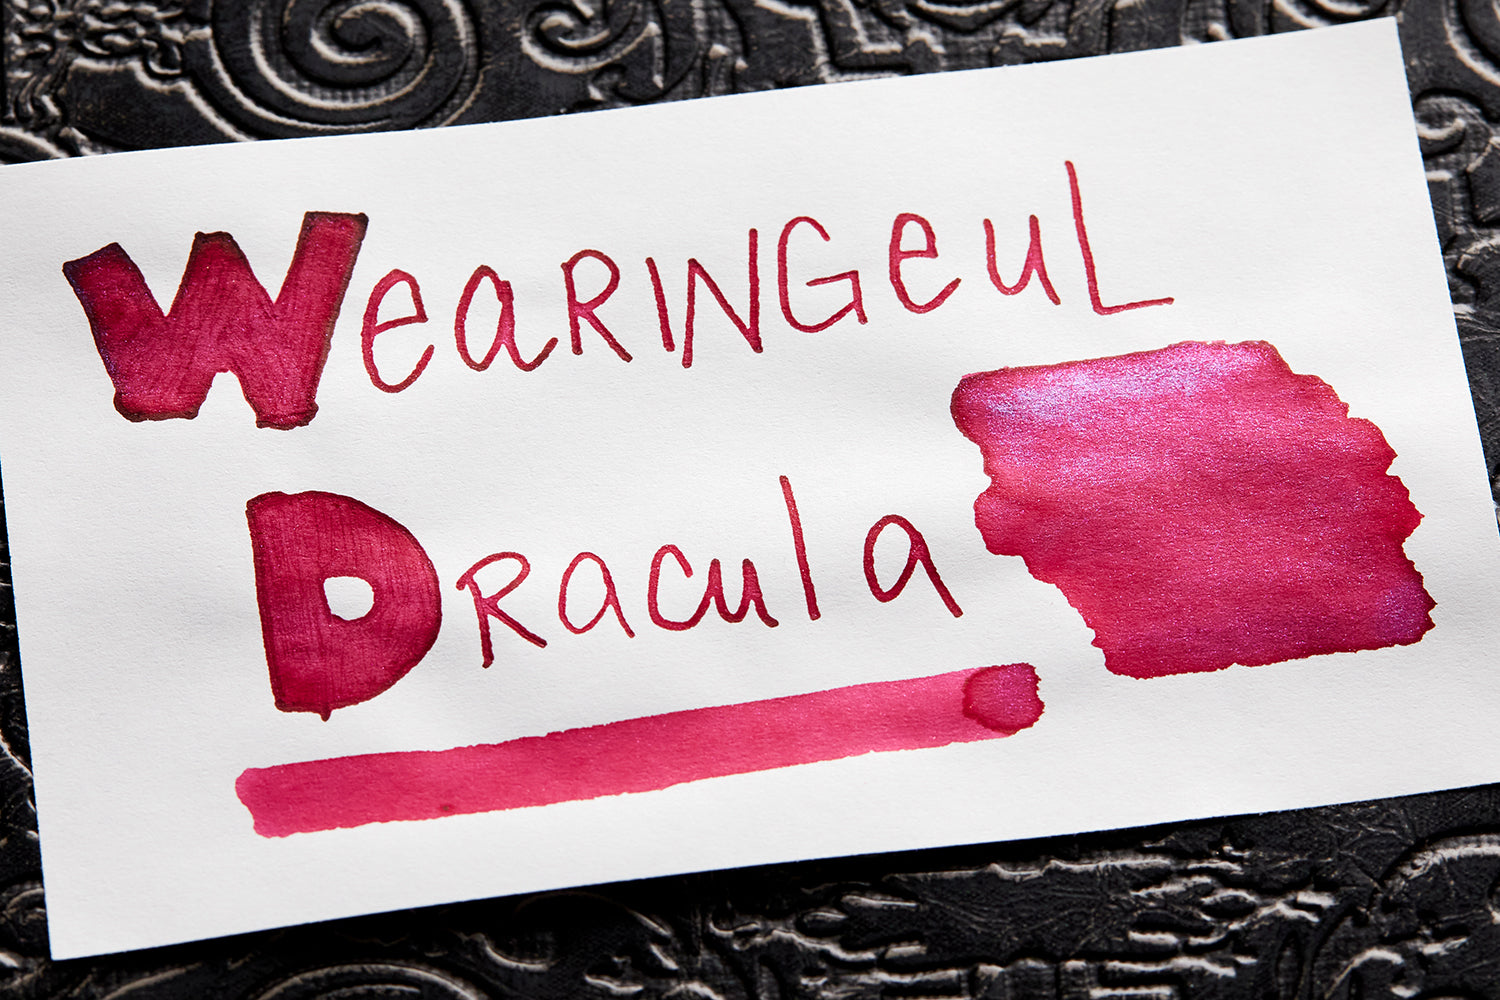 Wearingeul Dracula Fountain Pen Ink writing sample on white paper